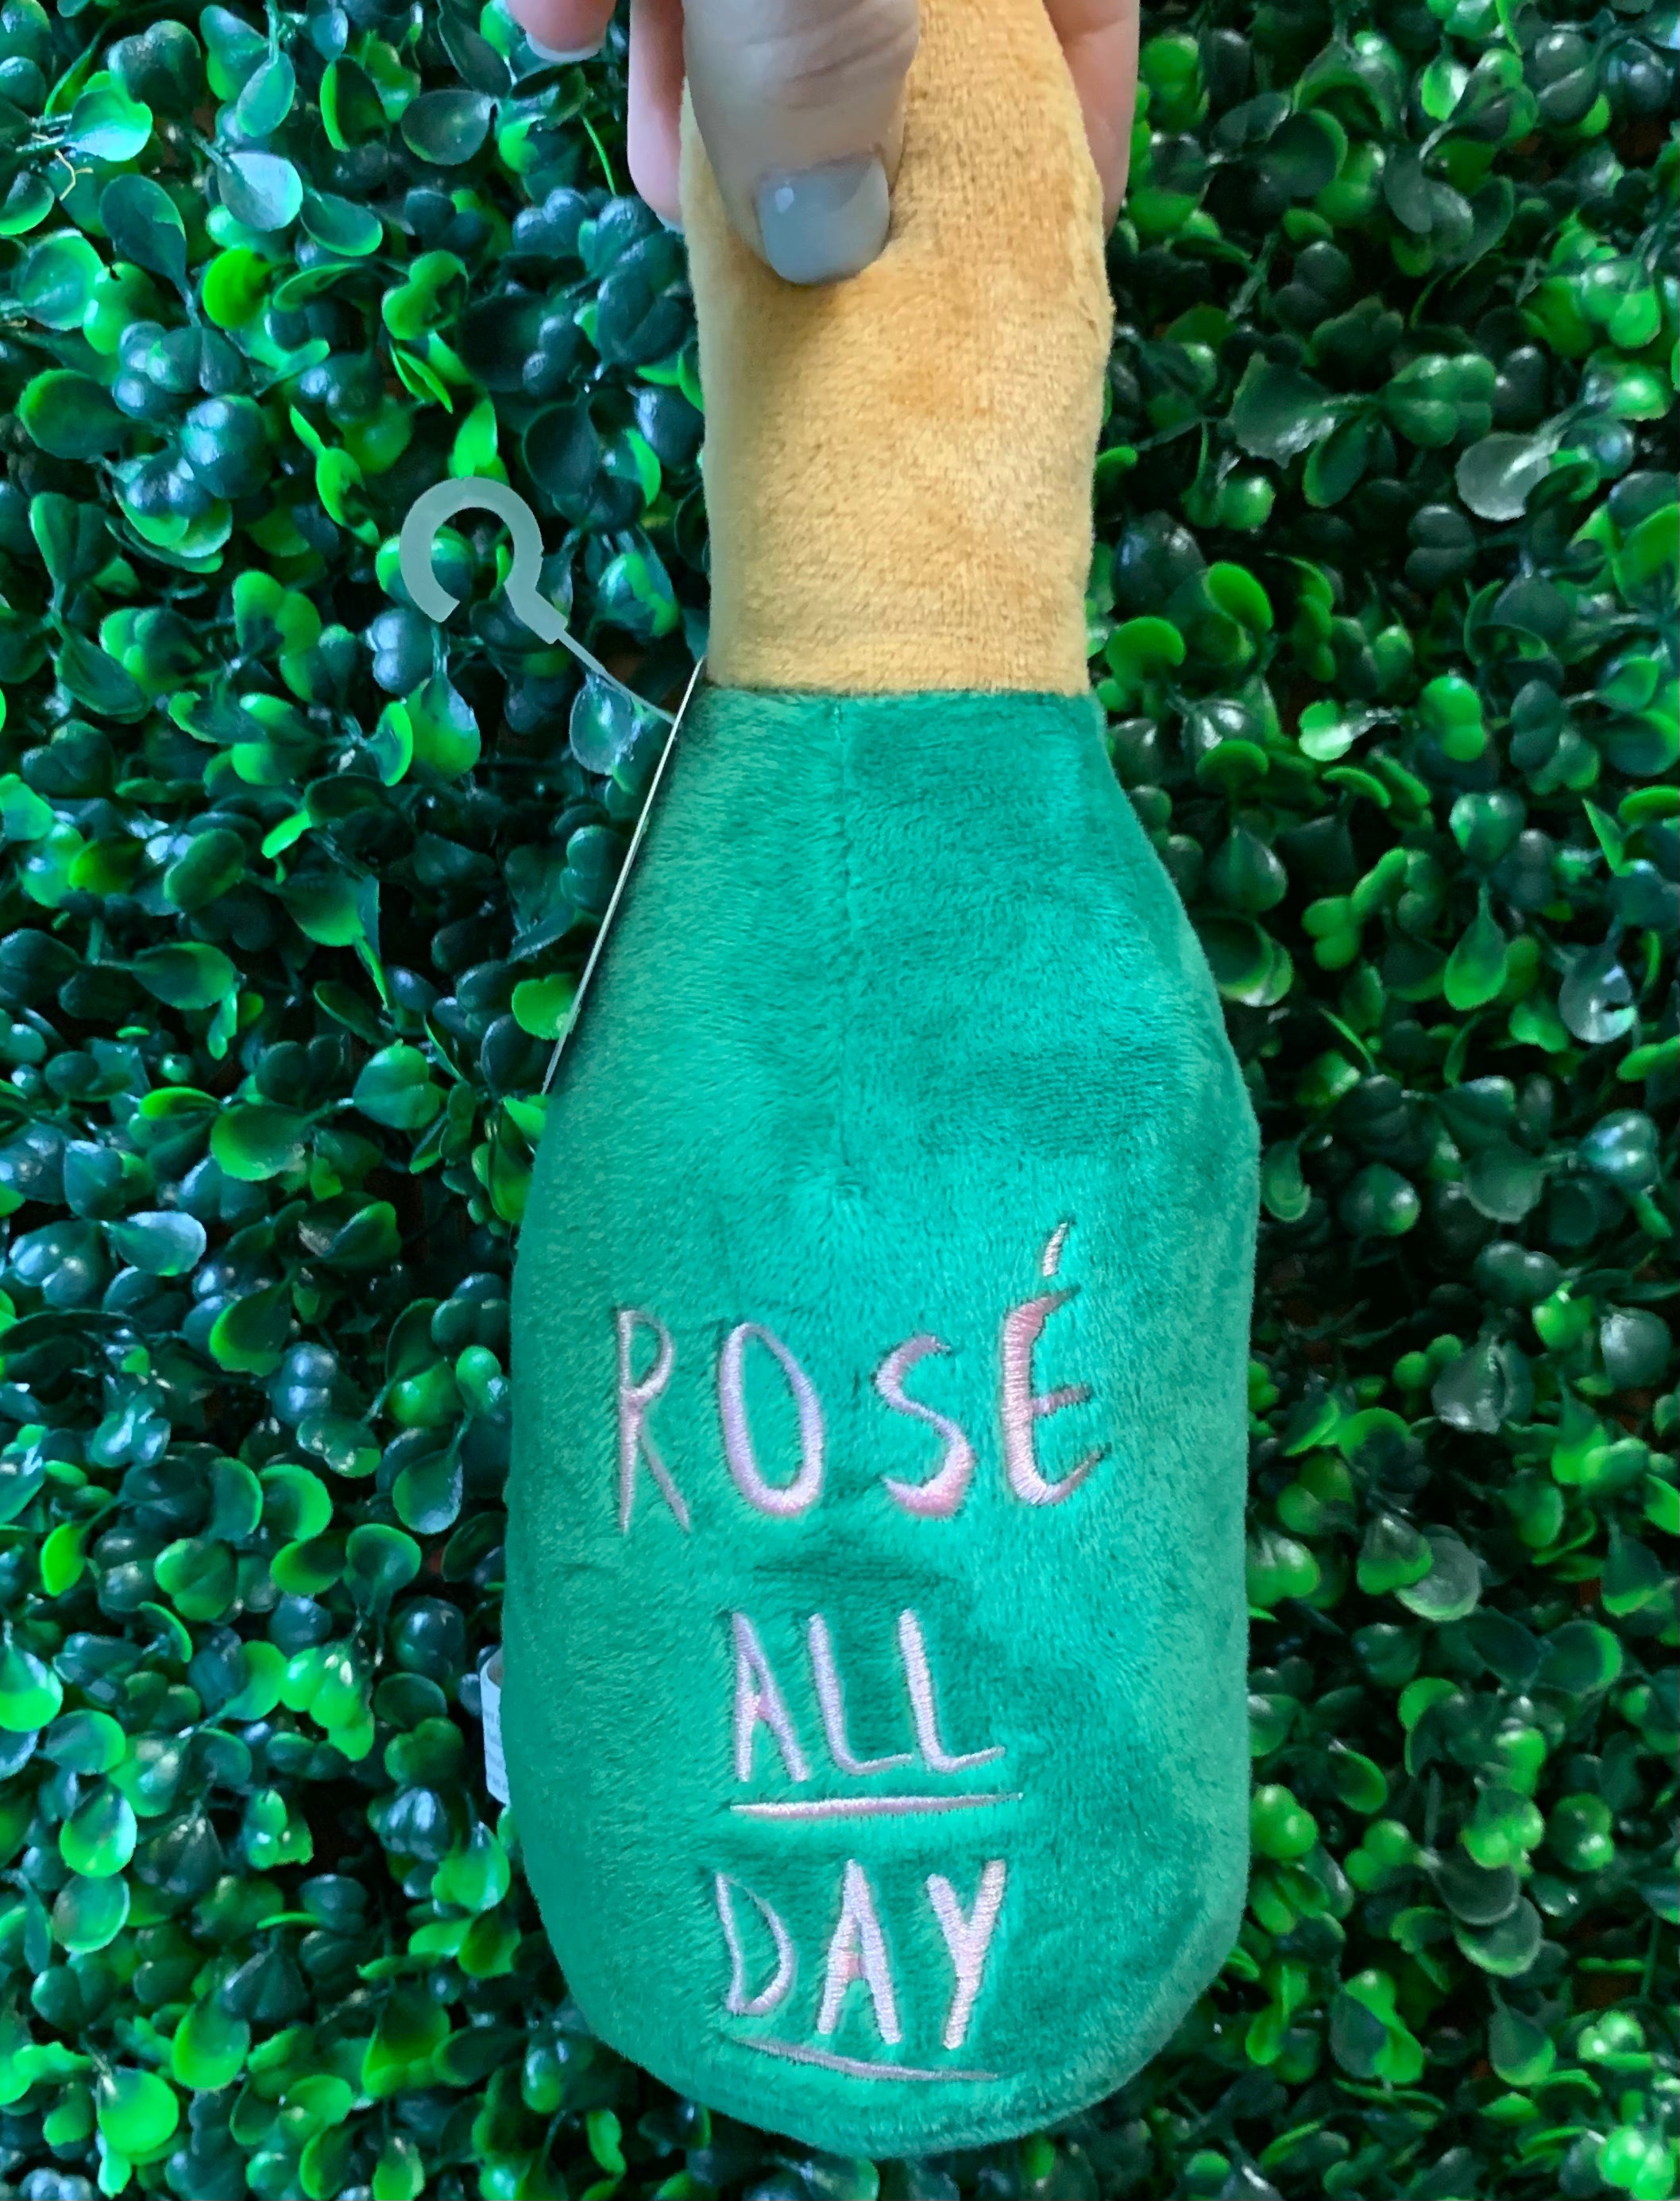 Woof Clicquot Rose Champagne Bottle